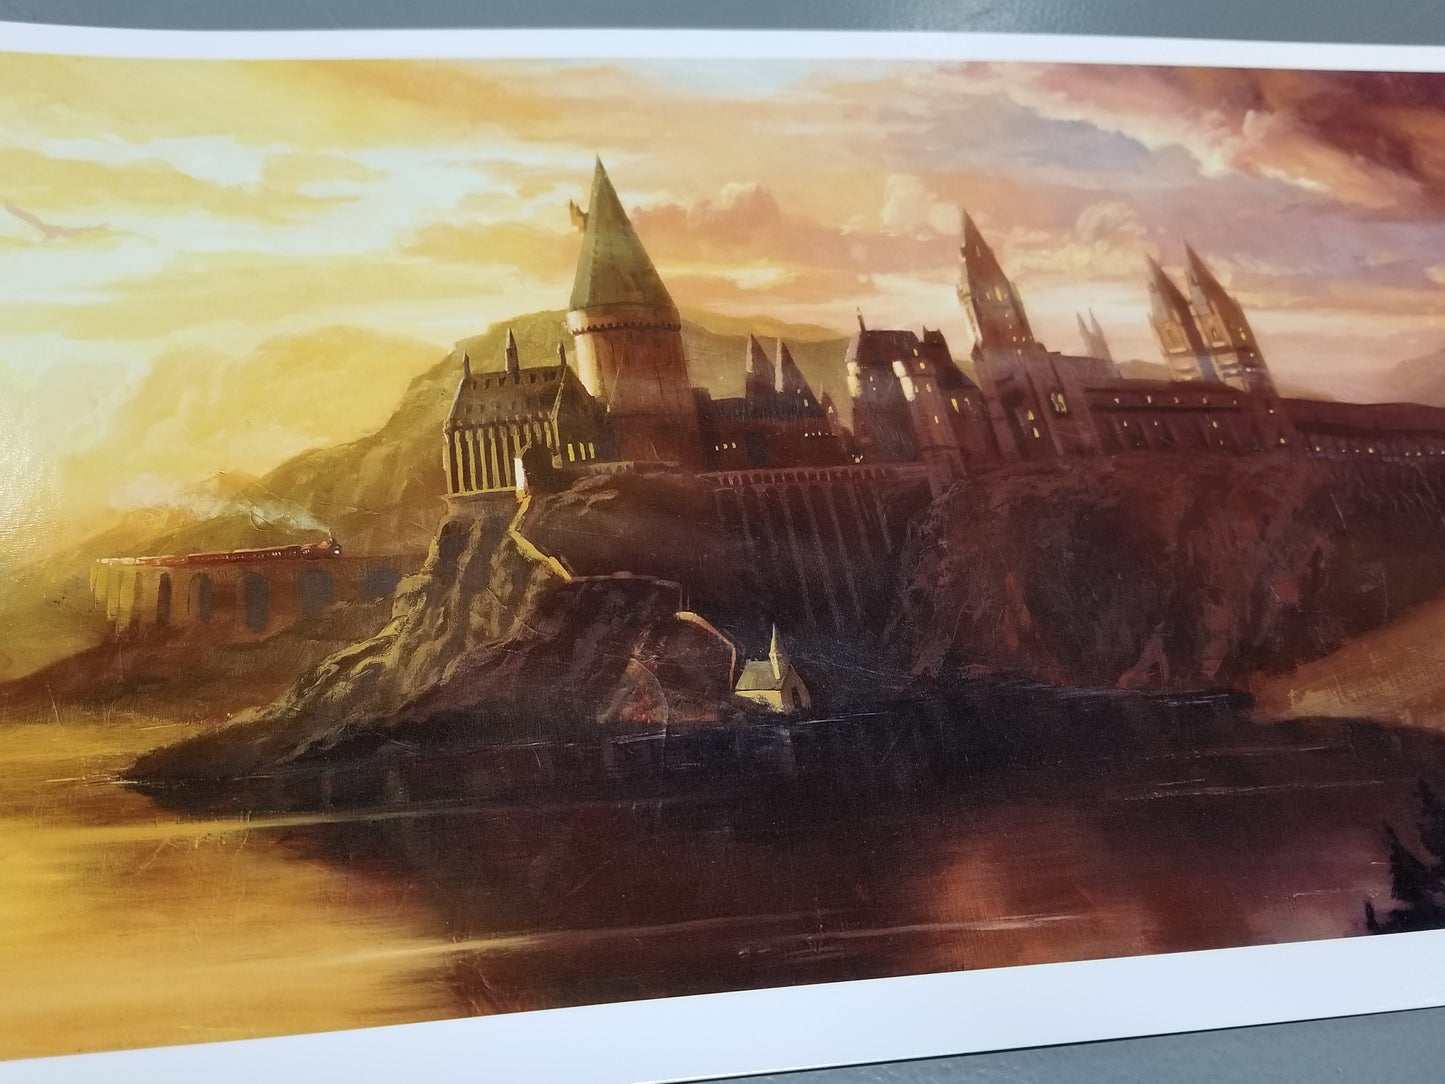 Load image into Gallery viewer, &amp;quot;Welcome to Hogwarts&amp;quot; Harry Potter Art by Christopher Clark  Stunning licensed art print of the Hogwarts castle at sunset. The Hogwarts Express is arriving, an owl flies overhead, and Hagrid&amp;#39;s Hutt can be seen.  Fully licensed fine art print, sized 10&amp;quot; x 18&amp;quot; on premium paper
